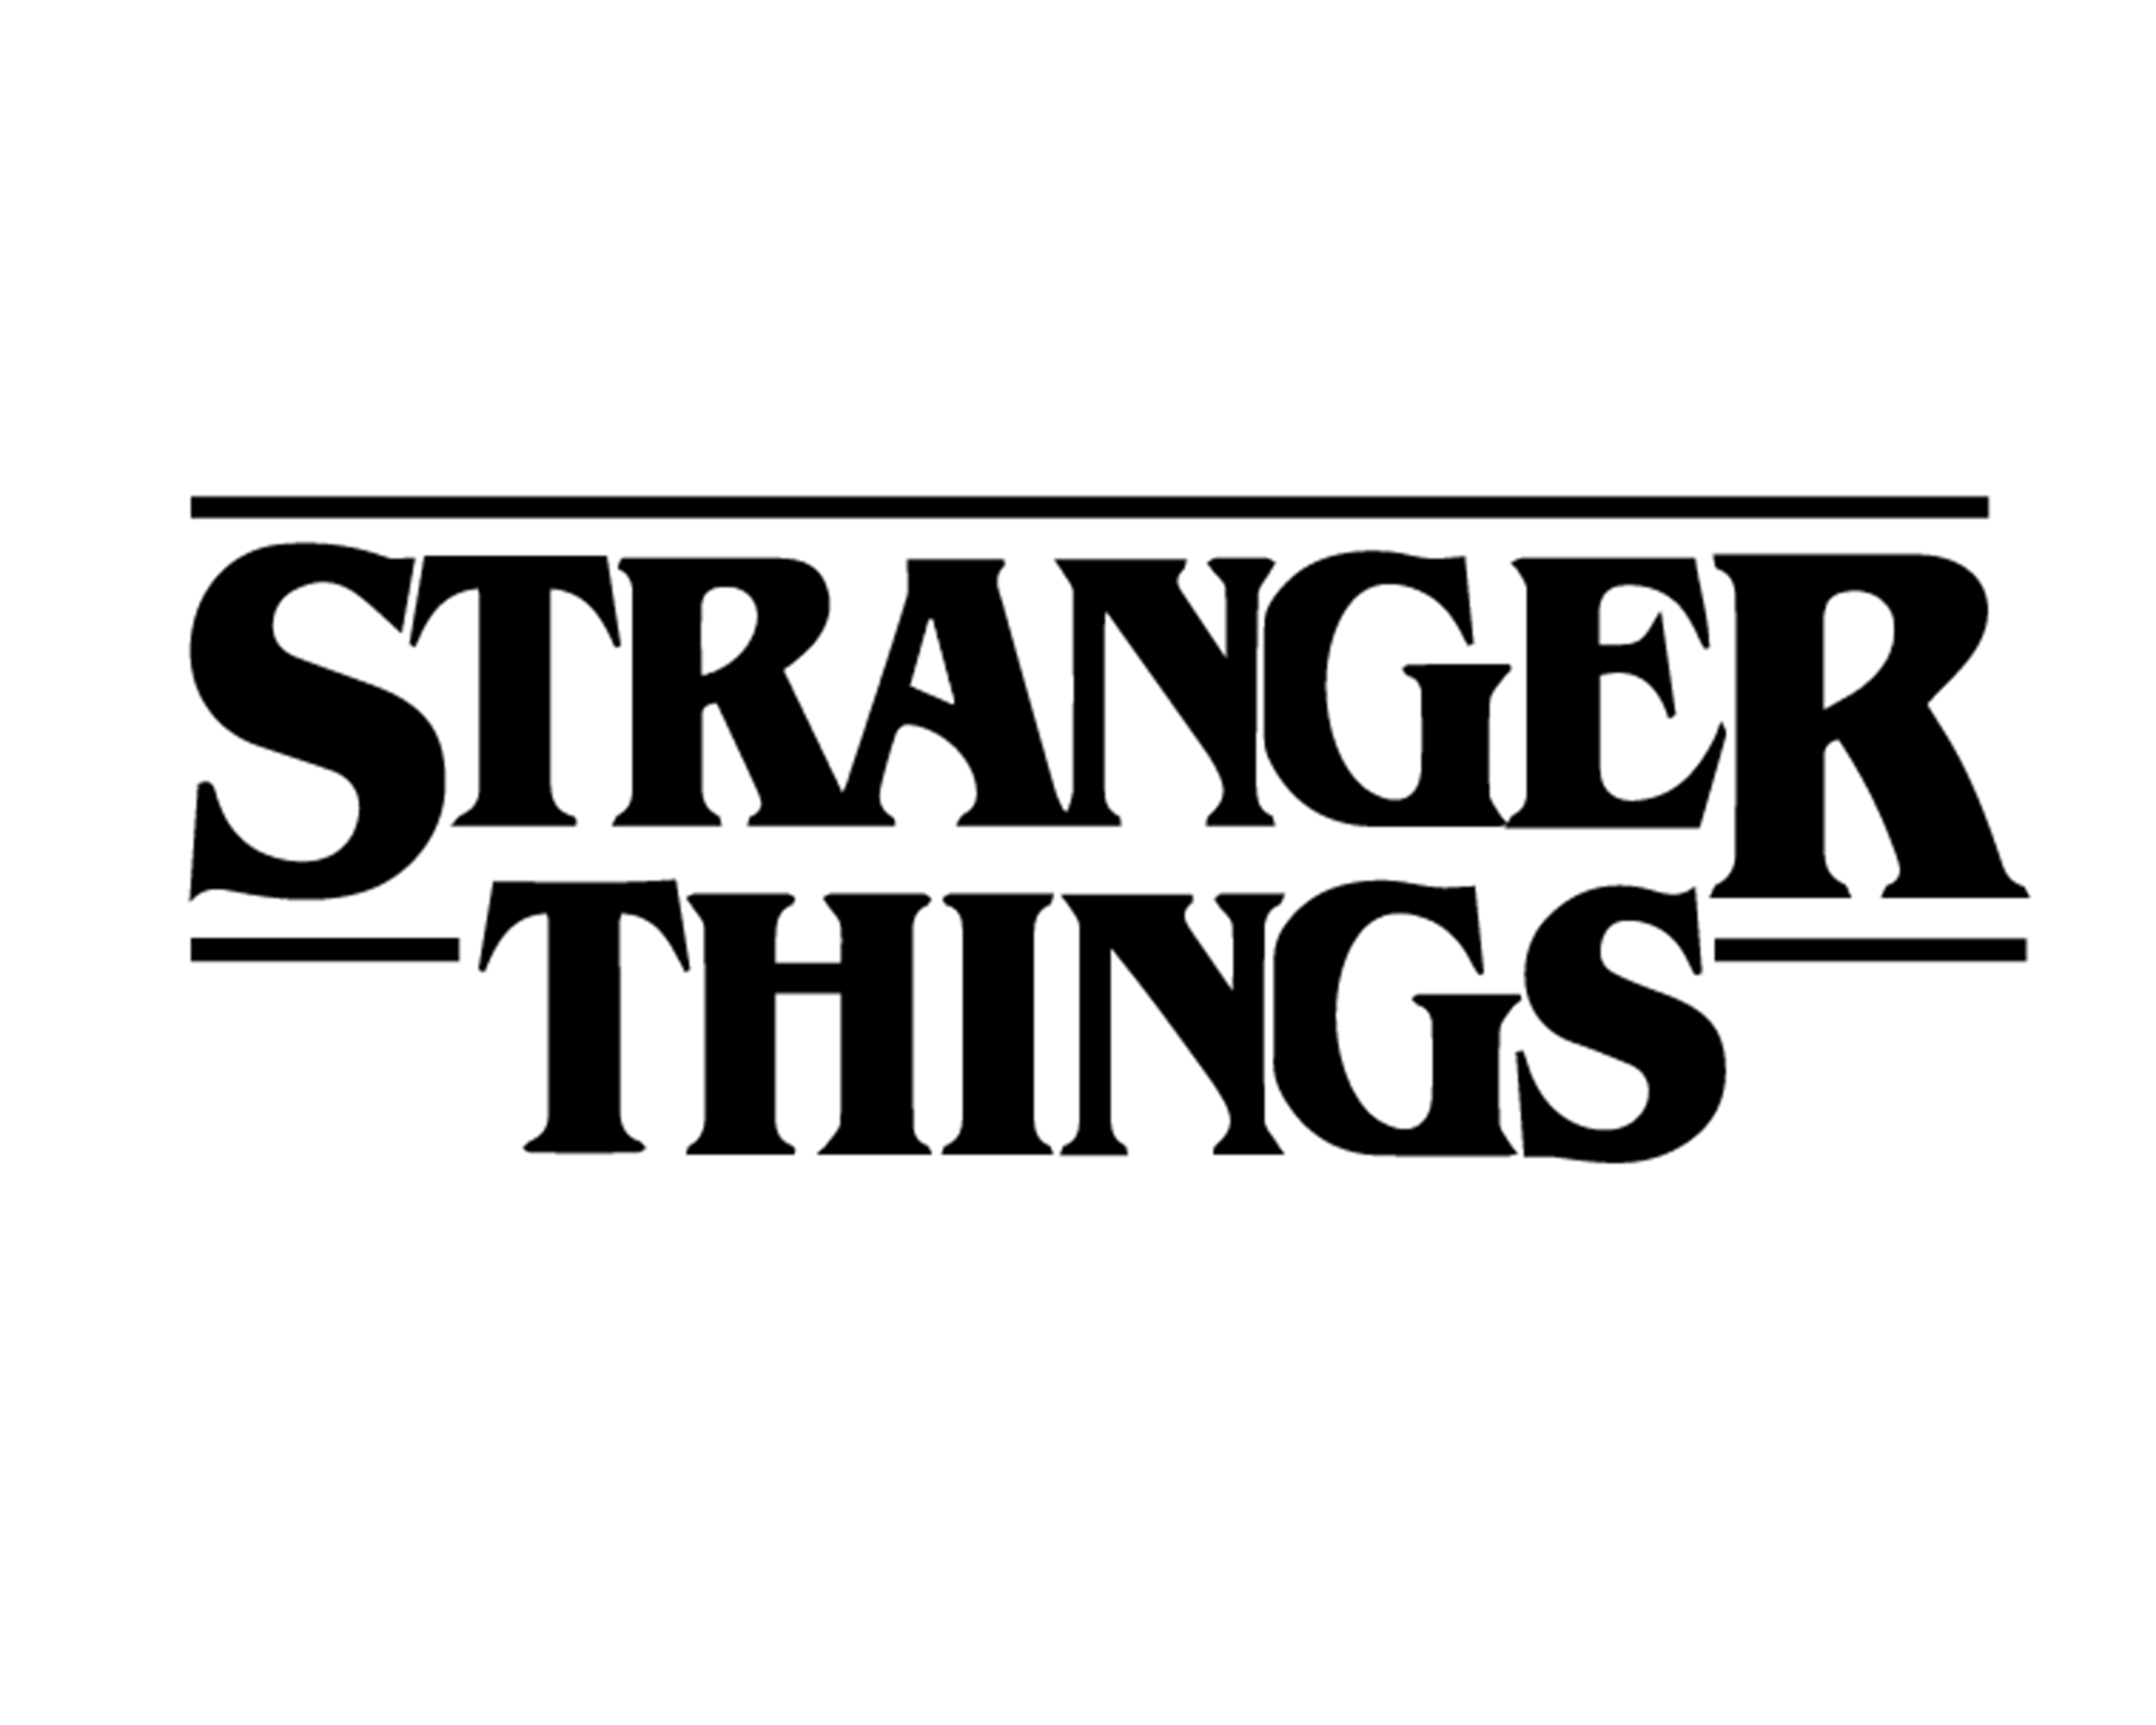 Stranger Things Logo - STRANGER THINGS LOGO VINYL PAINTING STENCIL SIZE PACK *HIGH QUALITY ...